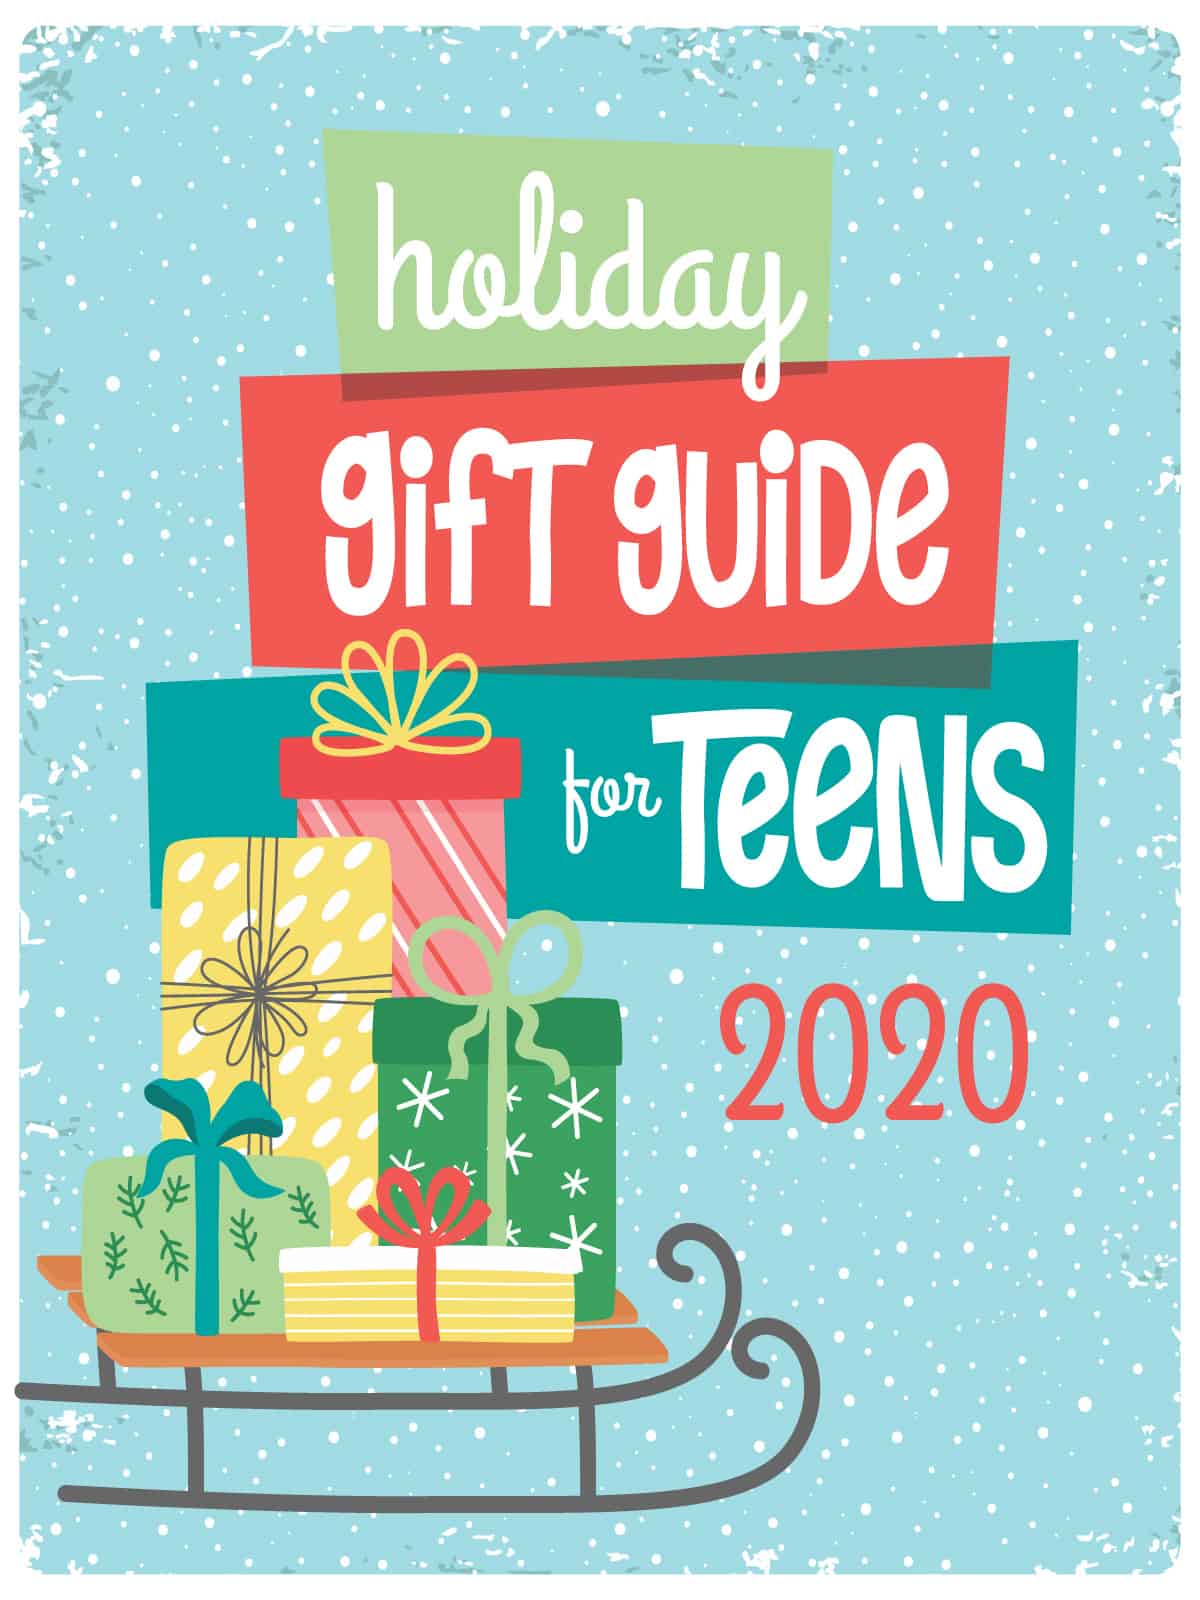 Holiday Gift Giving Guide - The Blind Guide - The Blind Guide